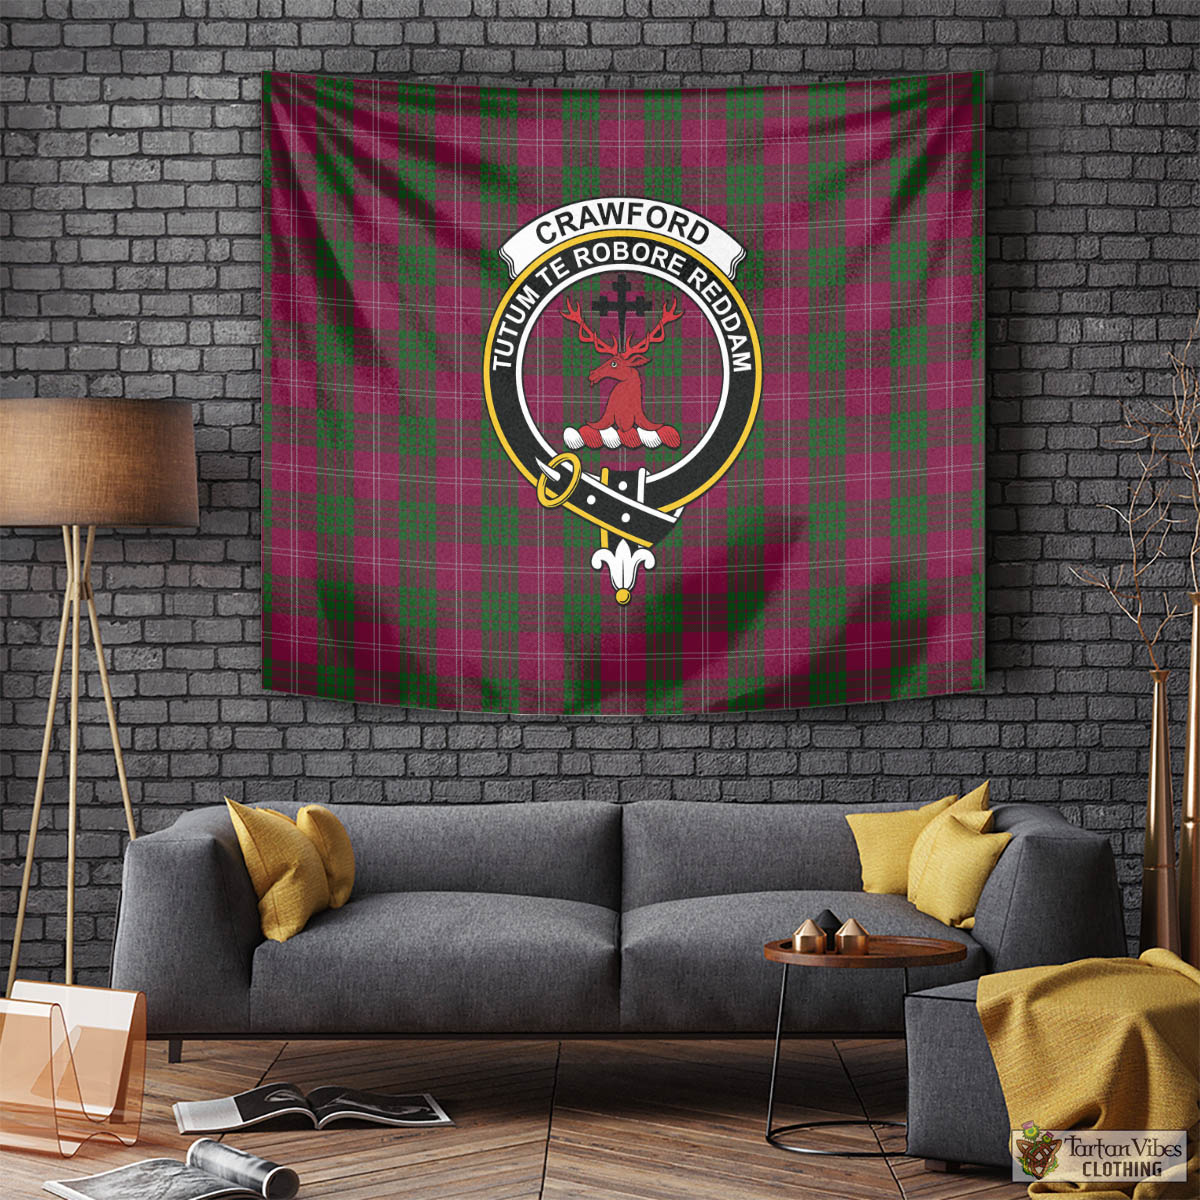 Tartan Vibes Clothing Crawford Tartan Tapestry Wall Hanging and Home Decor for Room with Family Crest